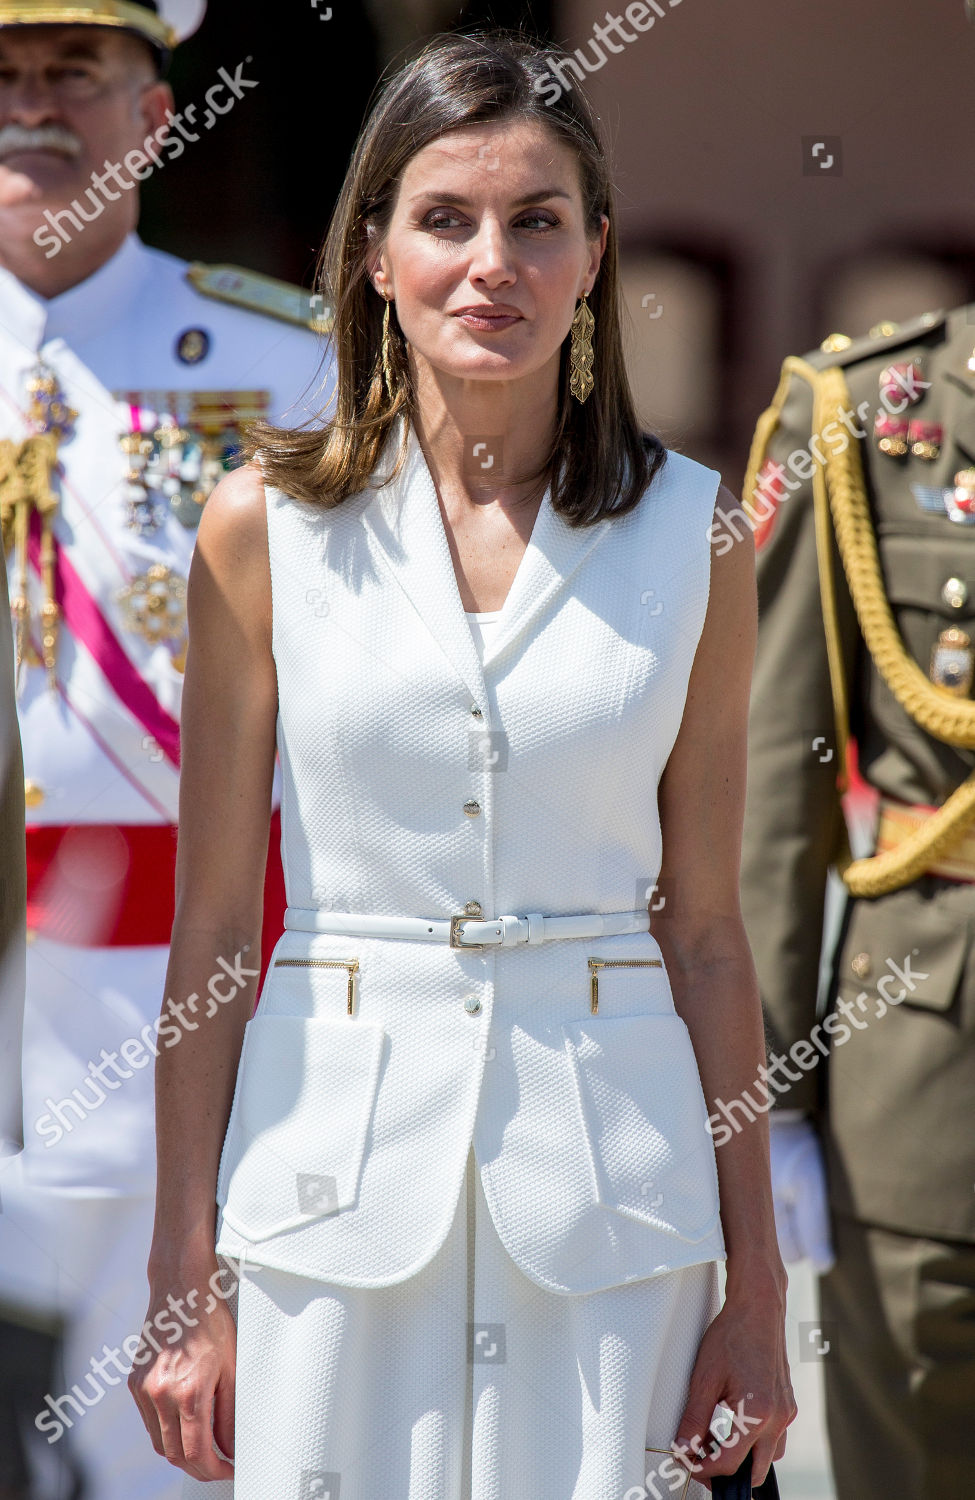 spanish-royals-deliver-royal-dispatch-at-the-central-academy-of-defense-madrid-spain-shutterstock-editorial-9764917h.jpg